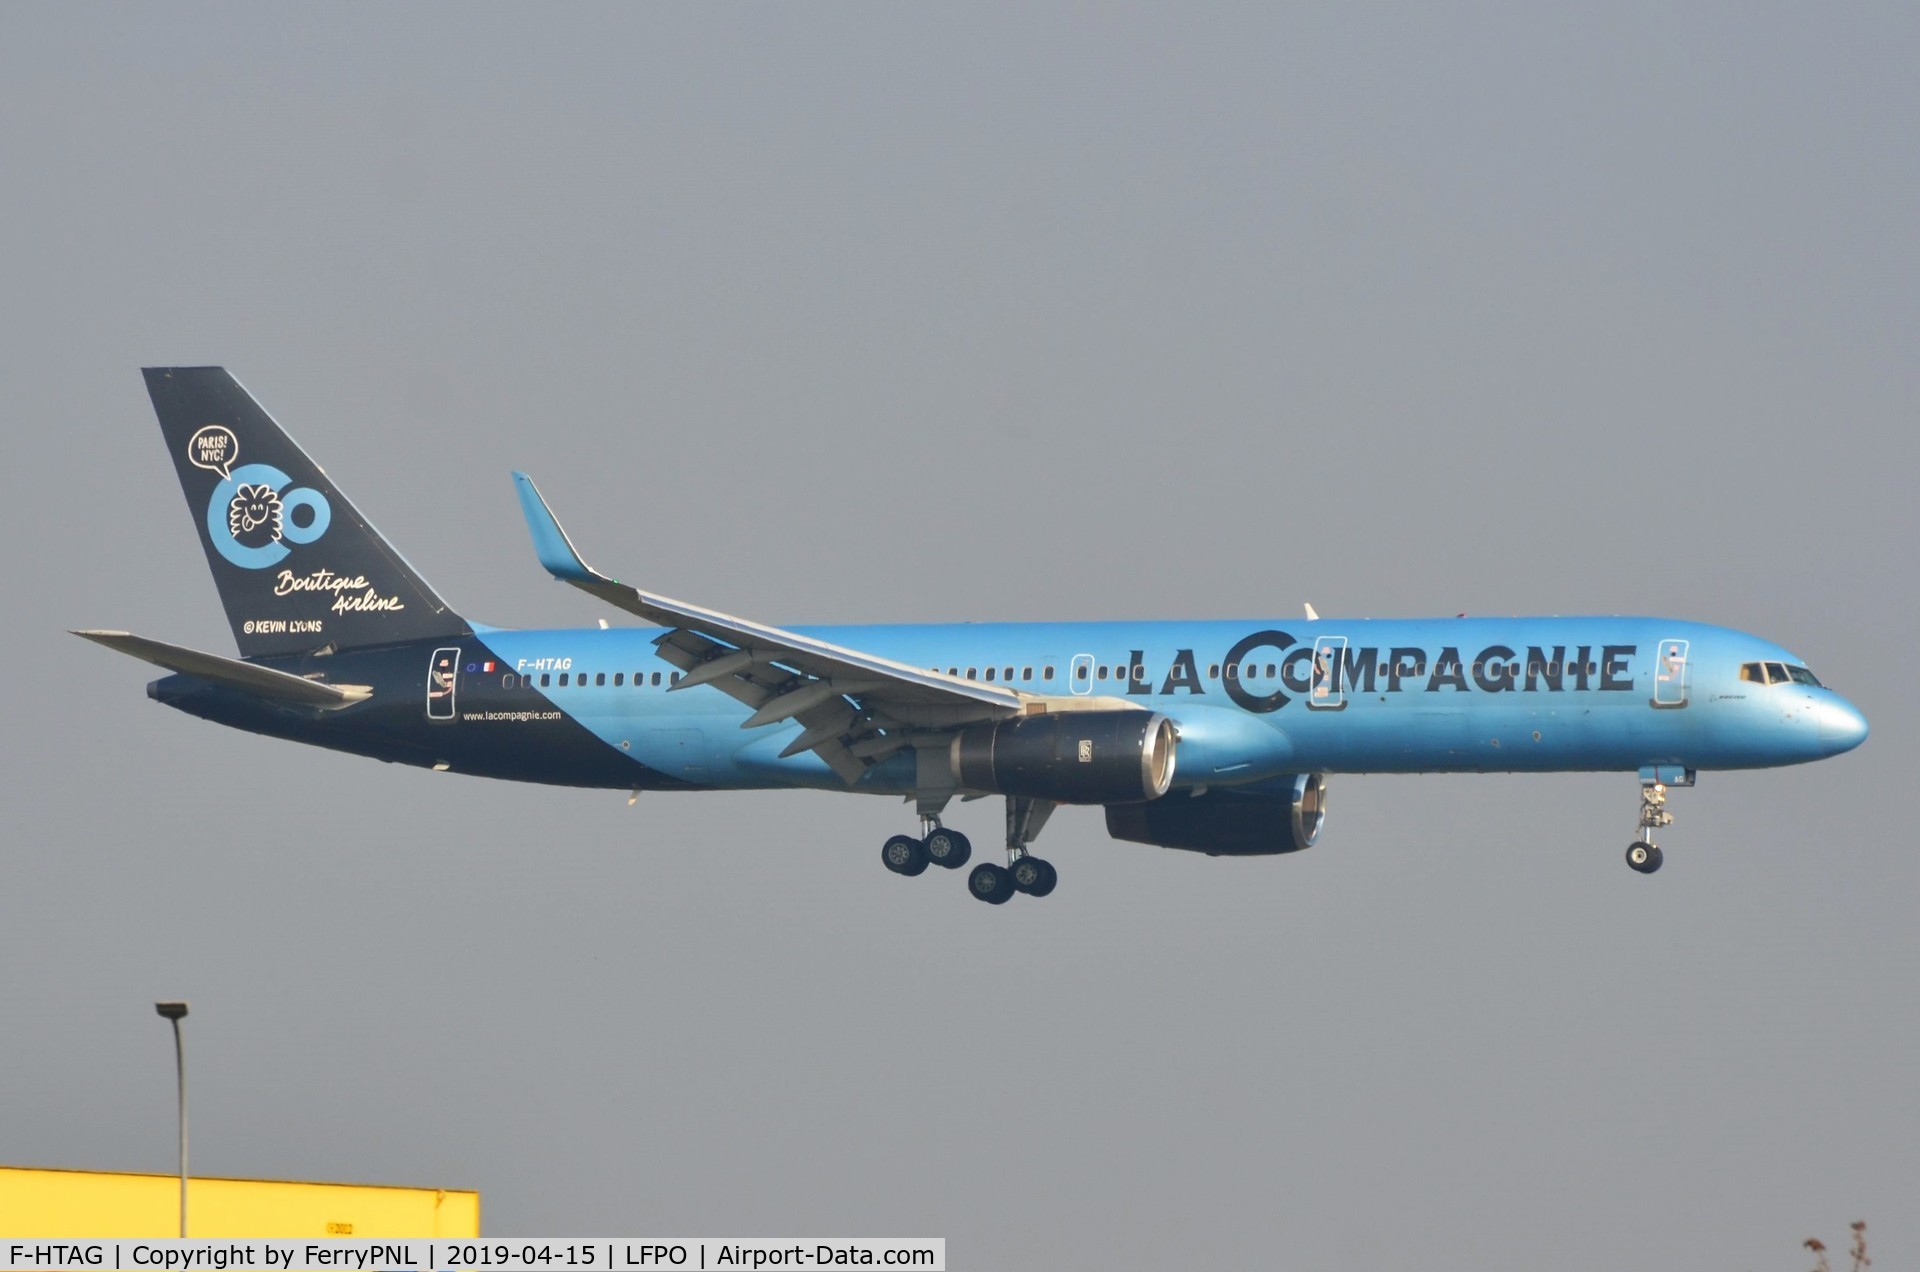 F-HTAG, 2000 Boeing 757-256 C/N 29307, La Compagnie B752 arriving, soon to be replaced by A321N